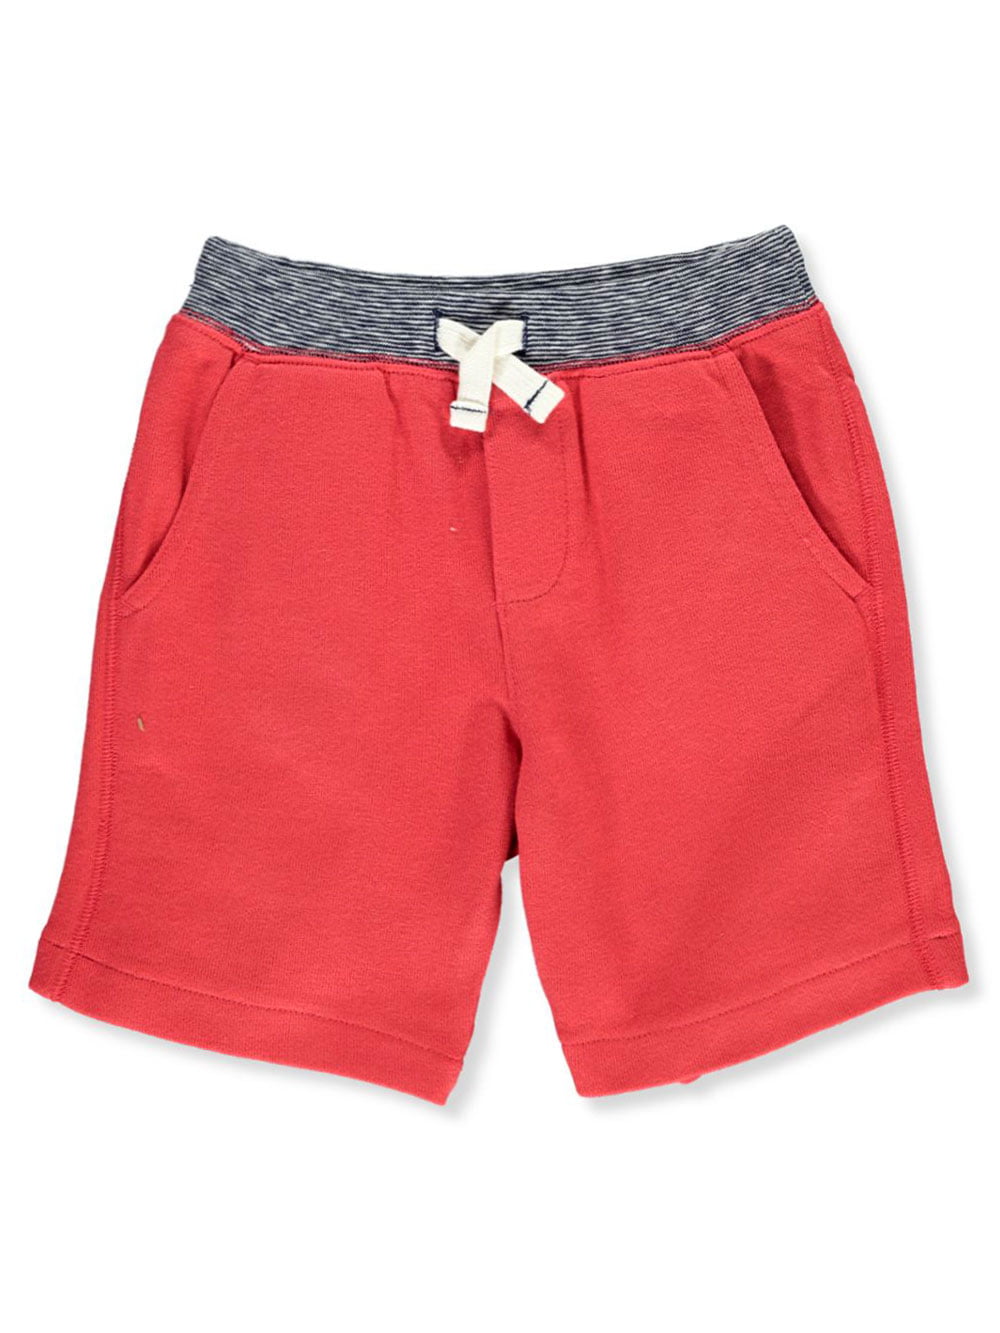 Carters Boys 2-Pack French Terry Shorts 